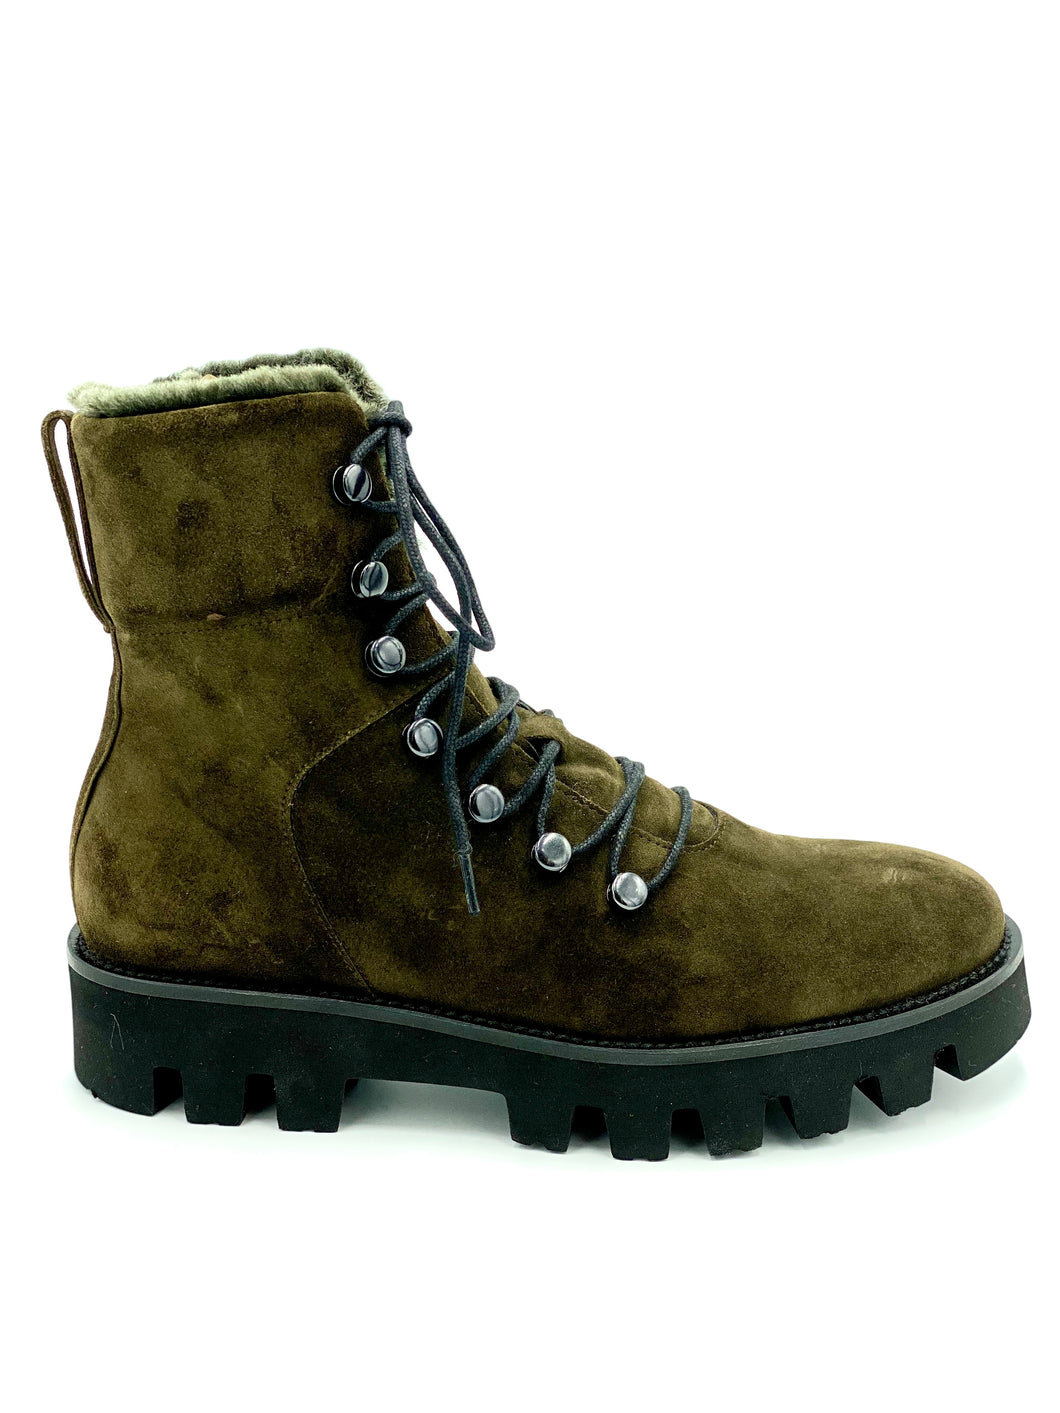 Homers Siena lace up boot in military green suede.